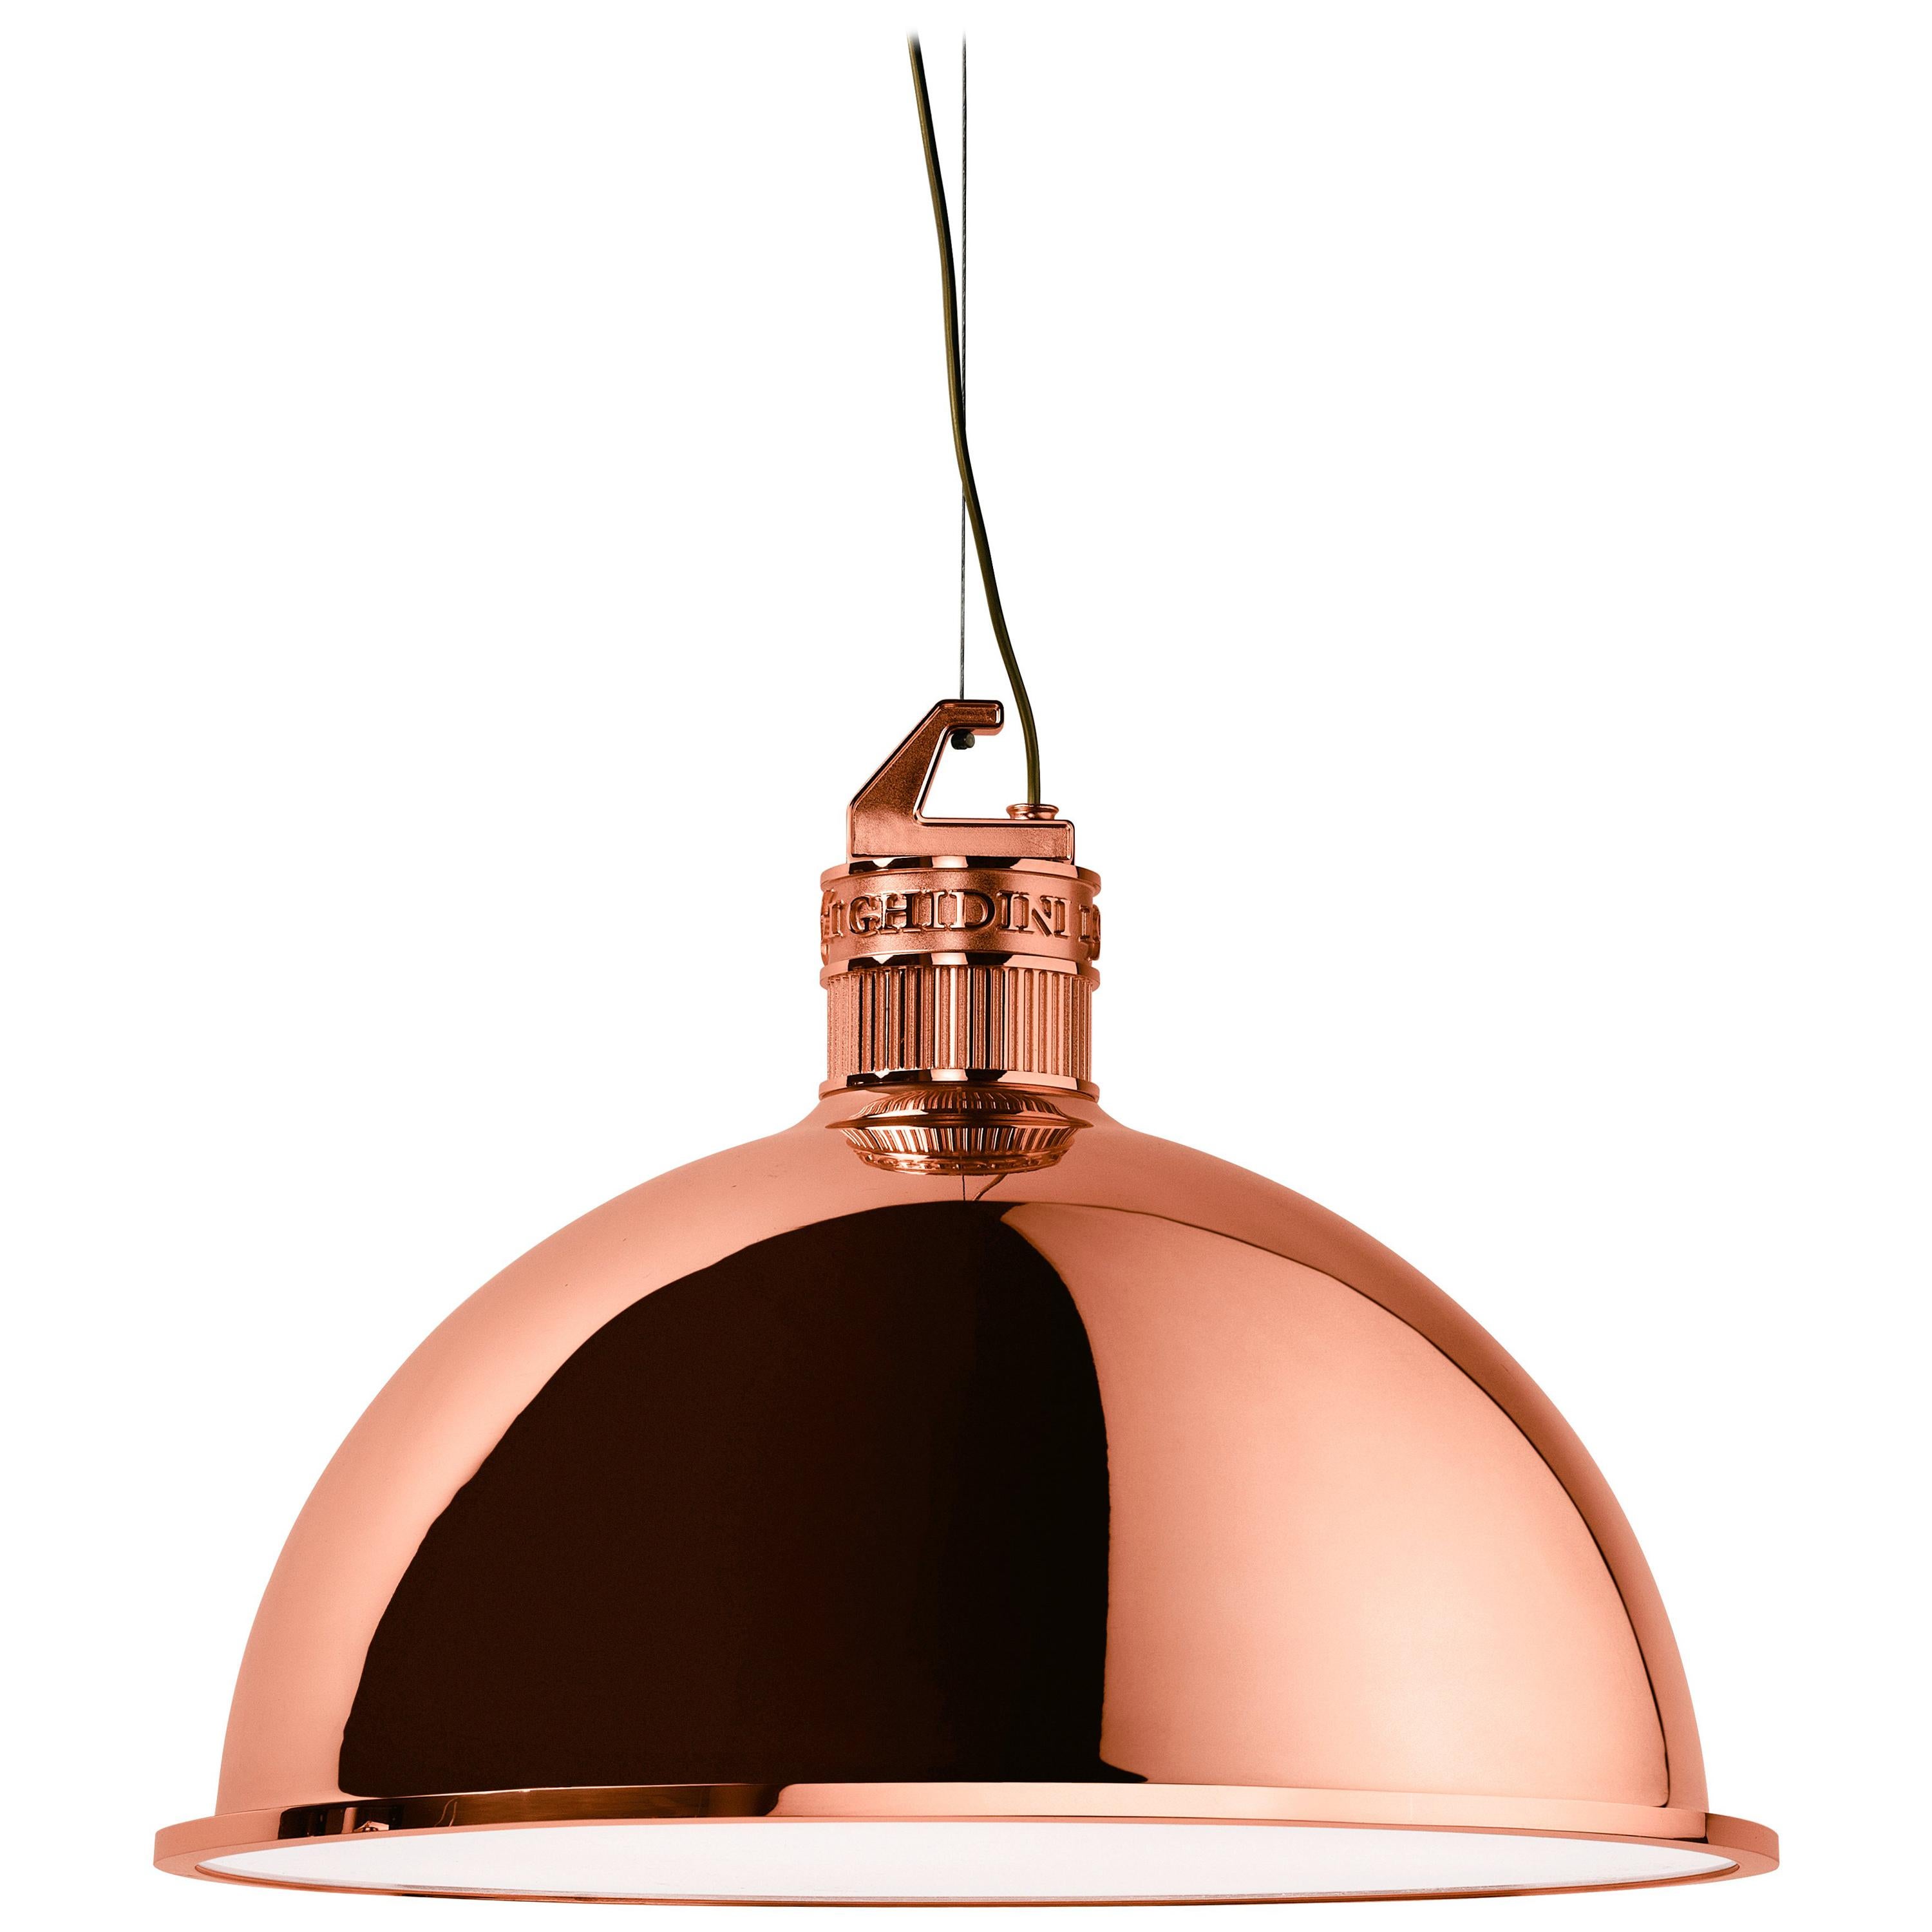 Ghidini 1961 Factory Large Suspension Light in Copper by Elisa Giovanni For Sale